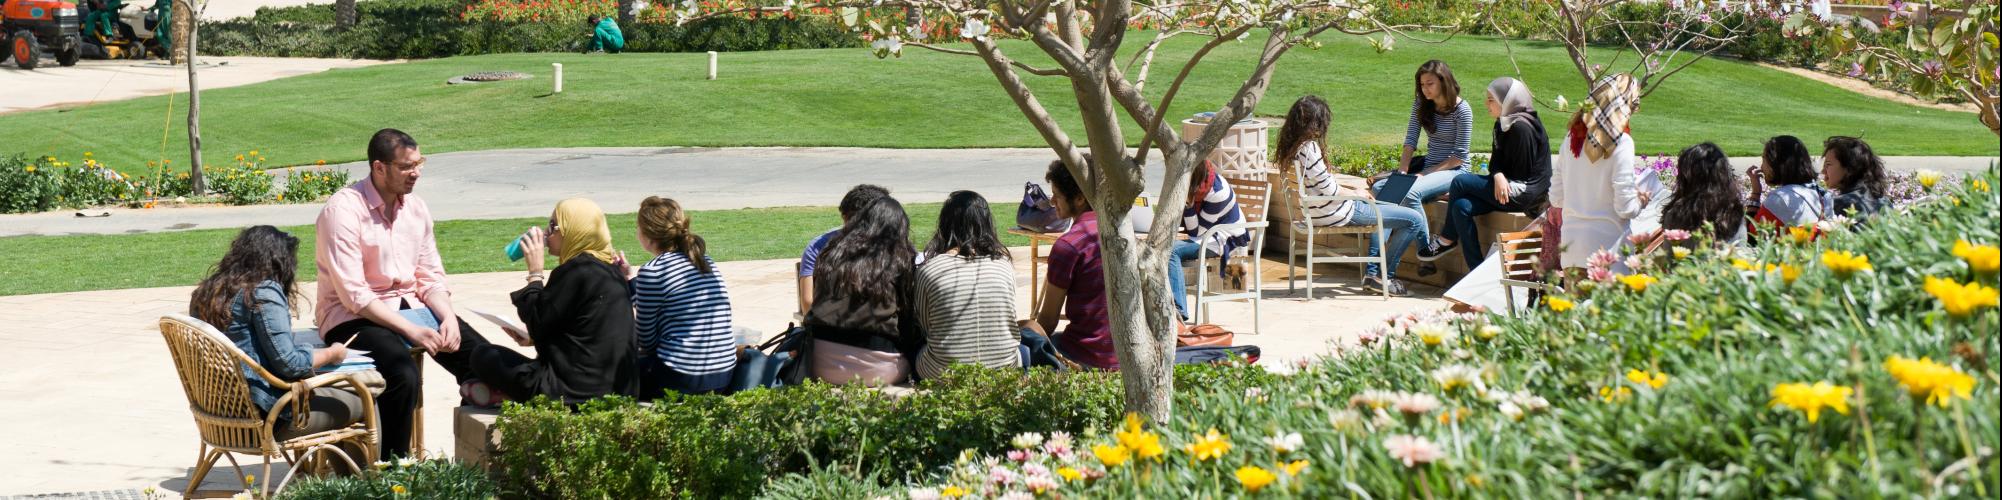 students in library garden